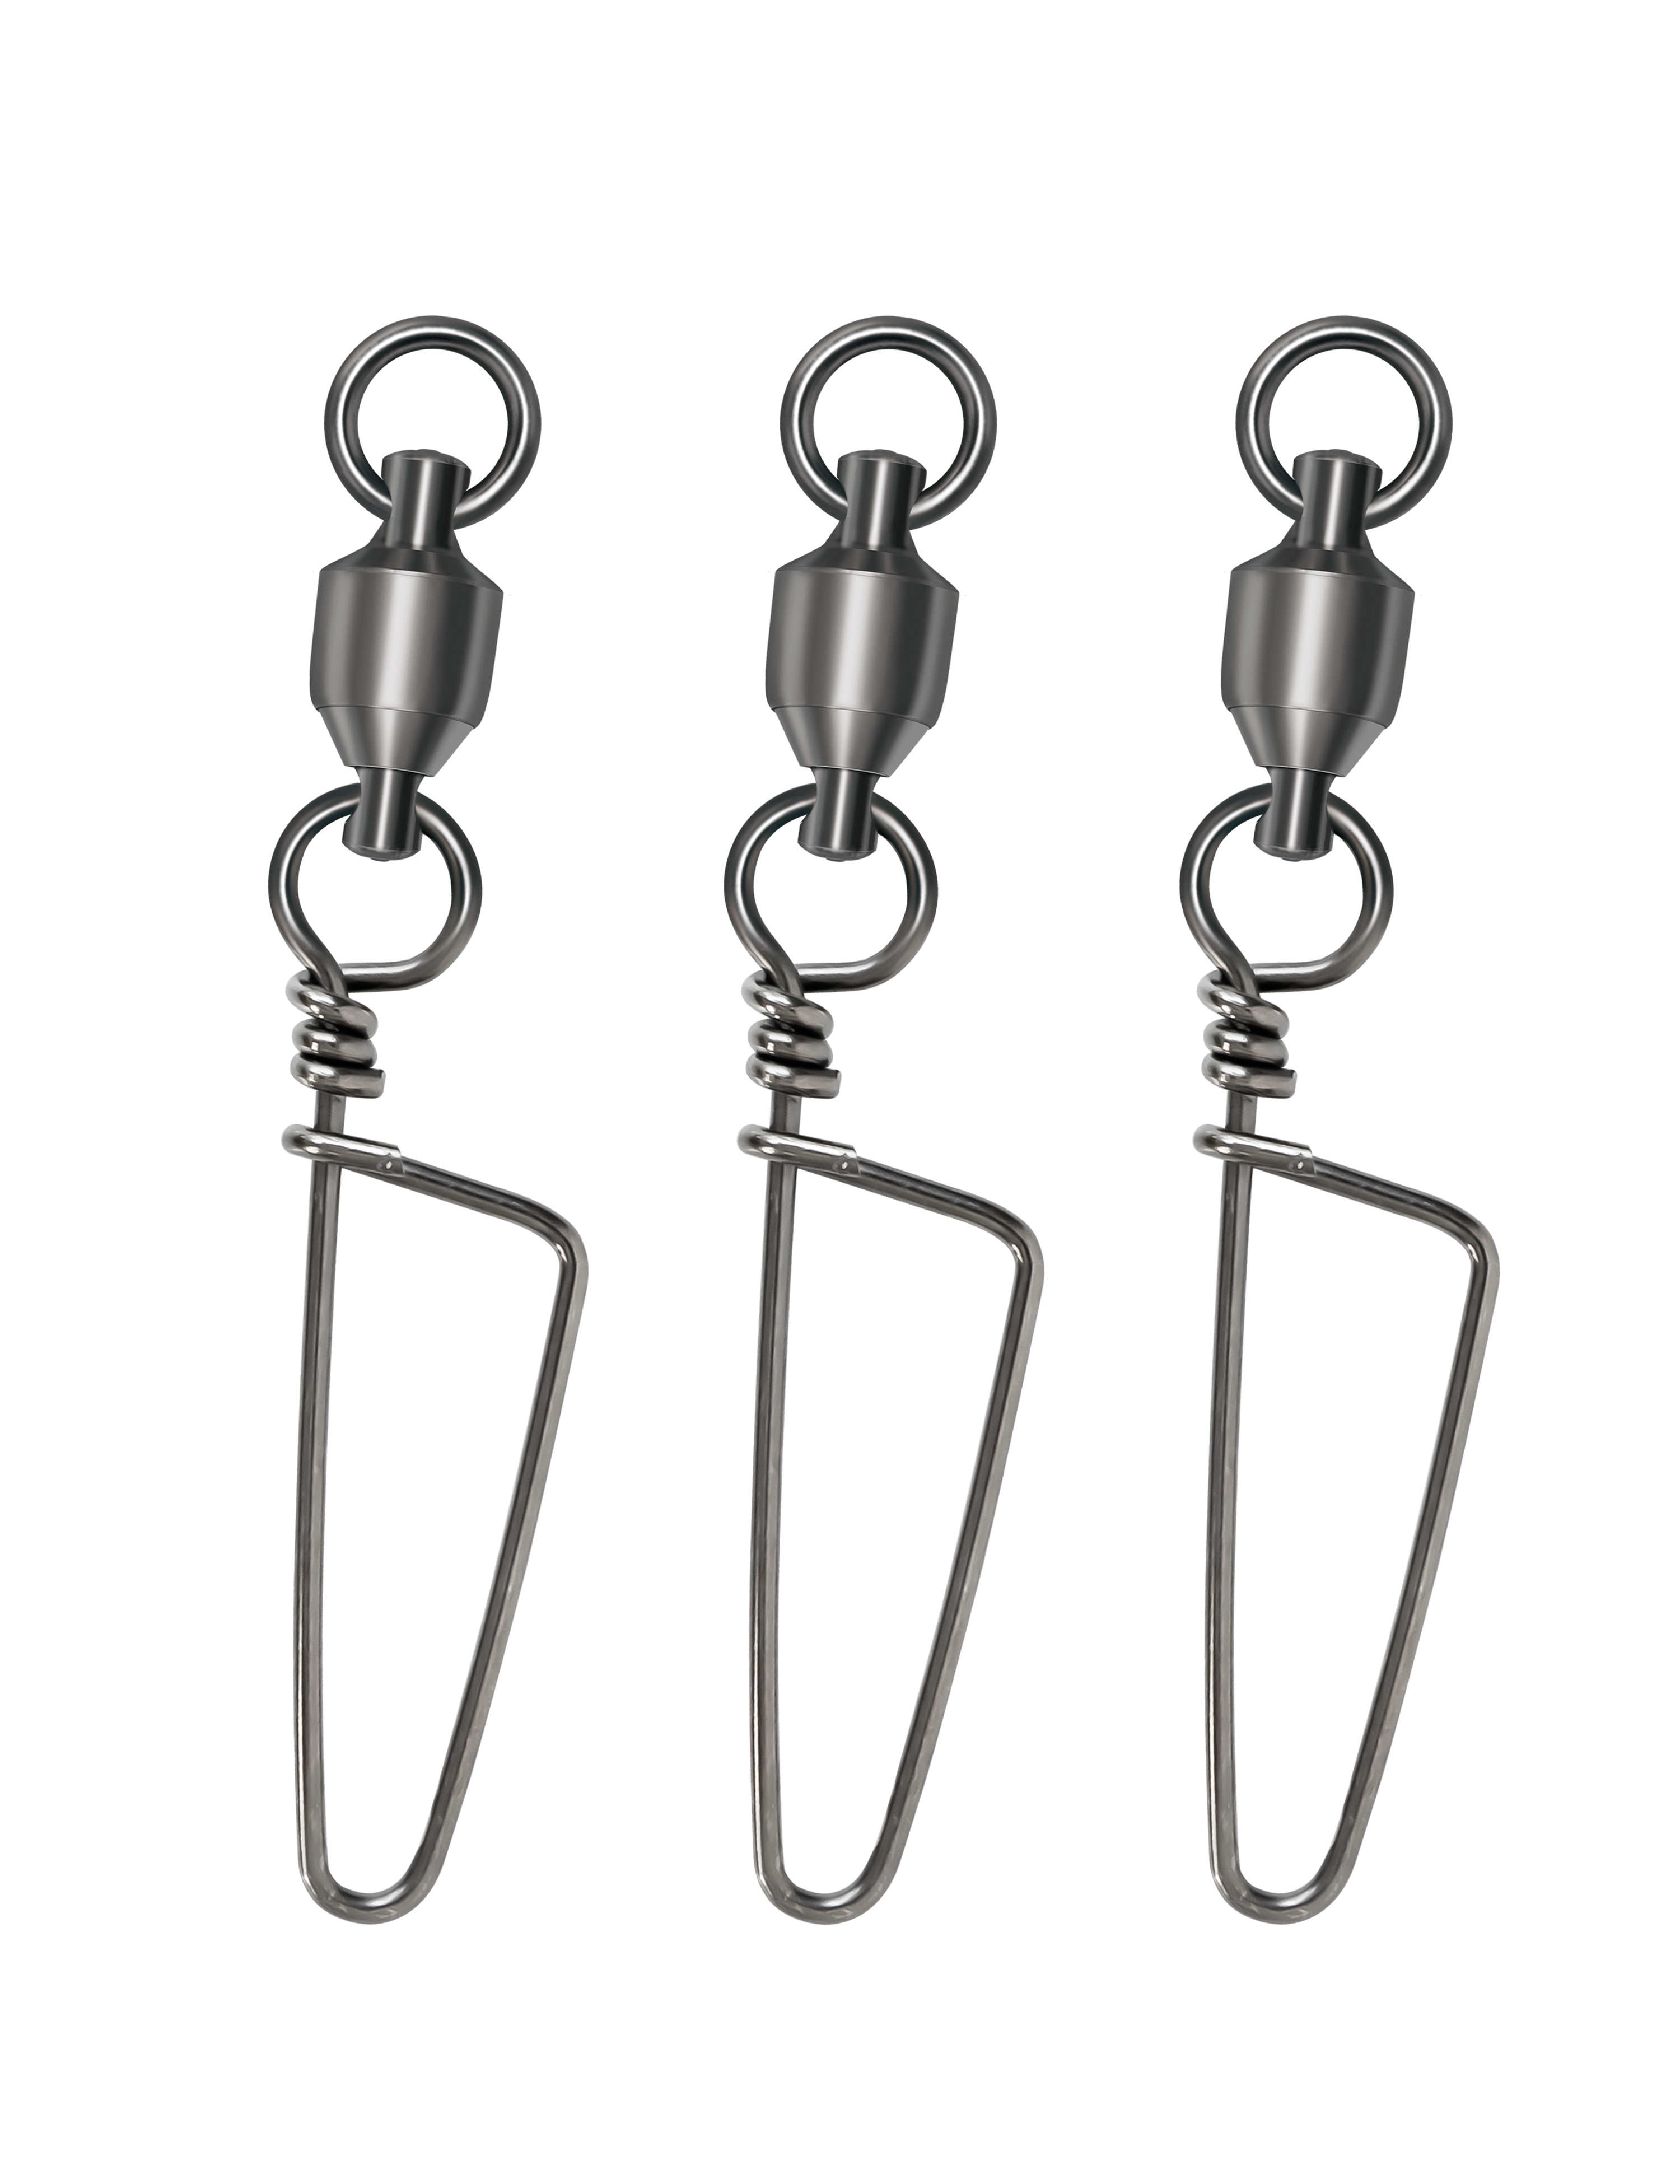  BLUEWING Double Snap Swivels 200lbs Stainless Steel